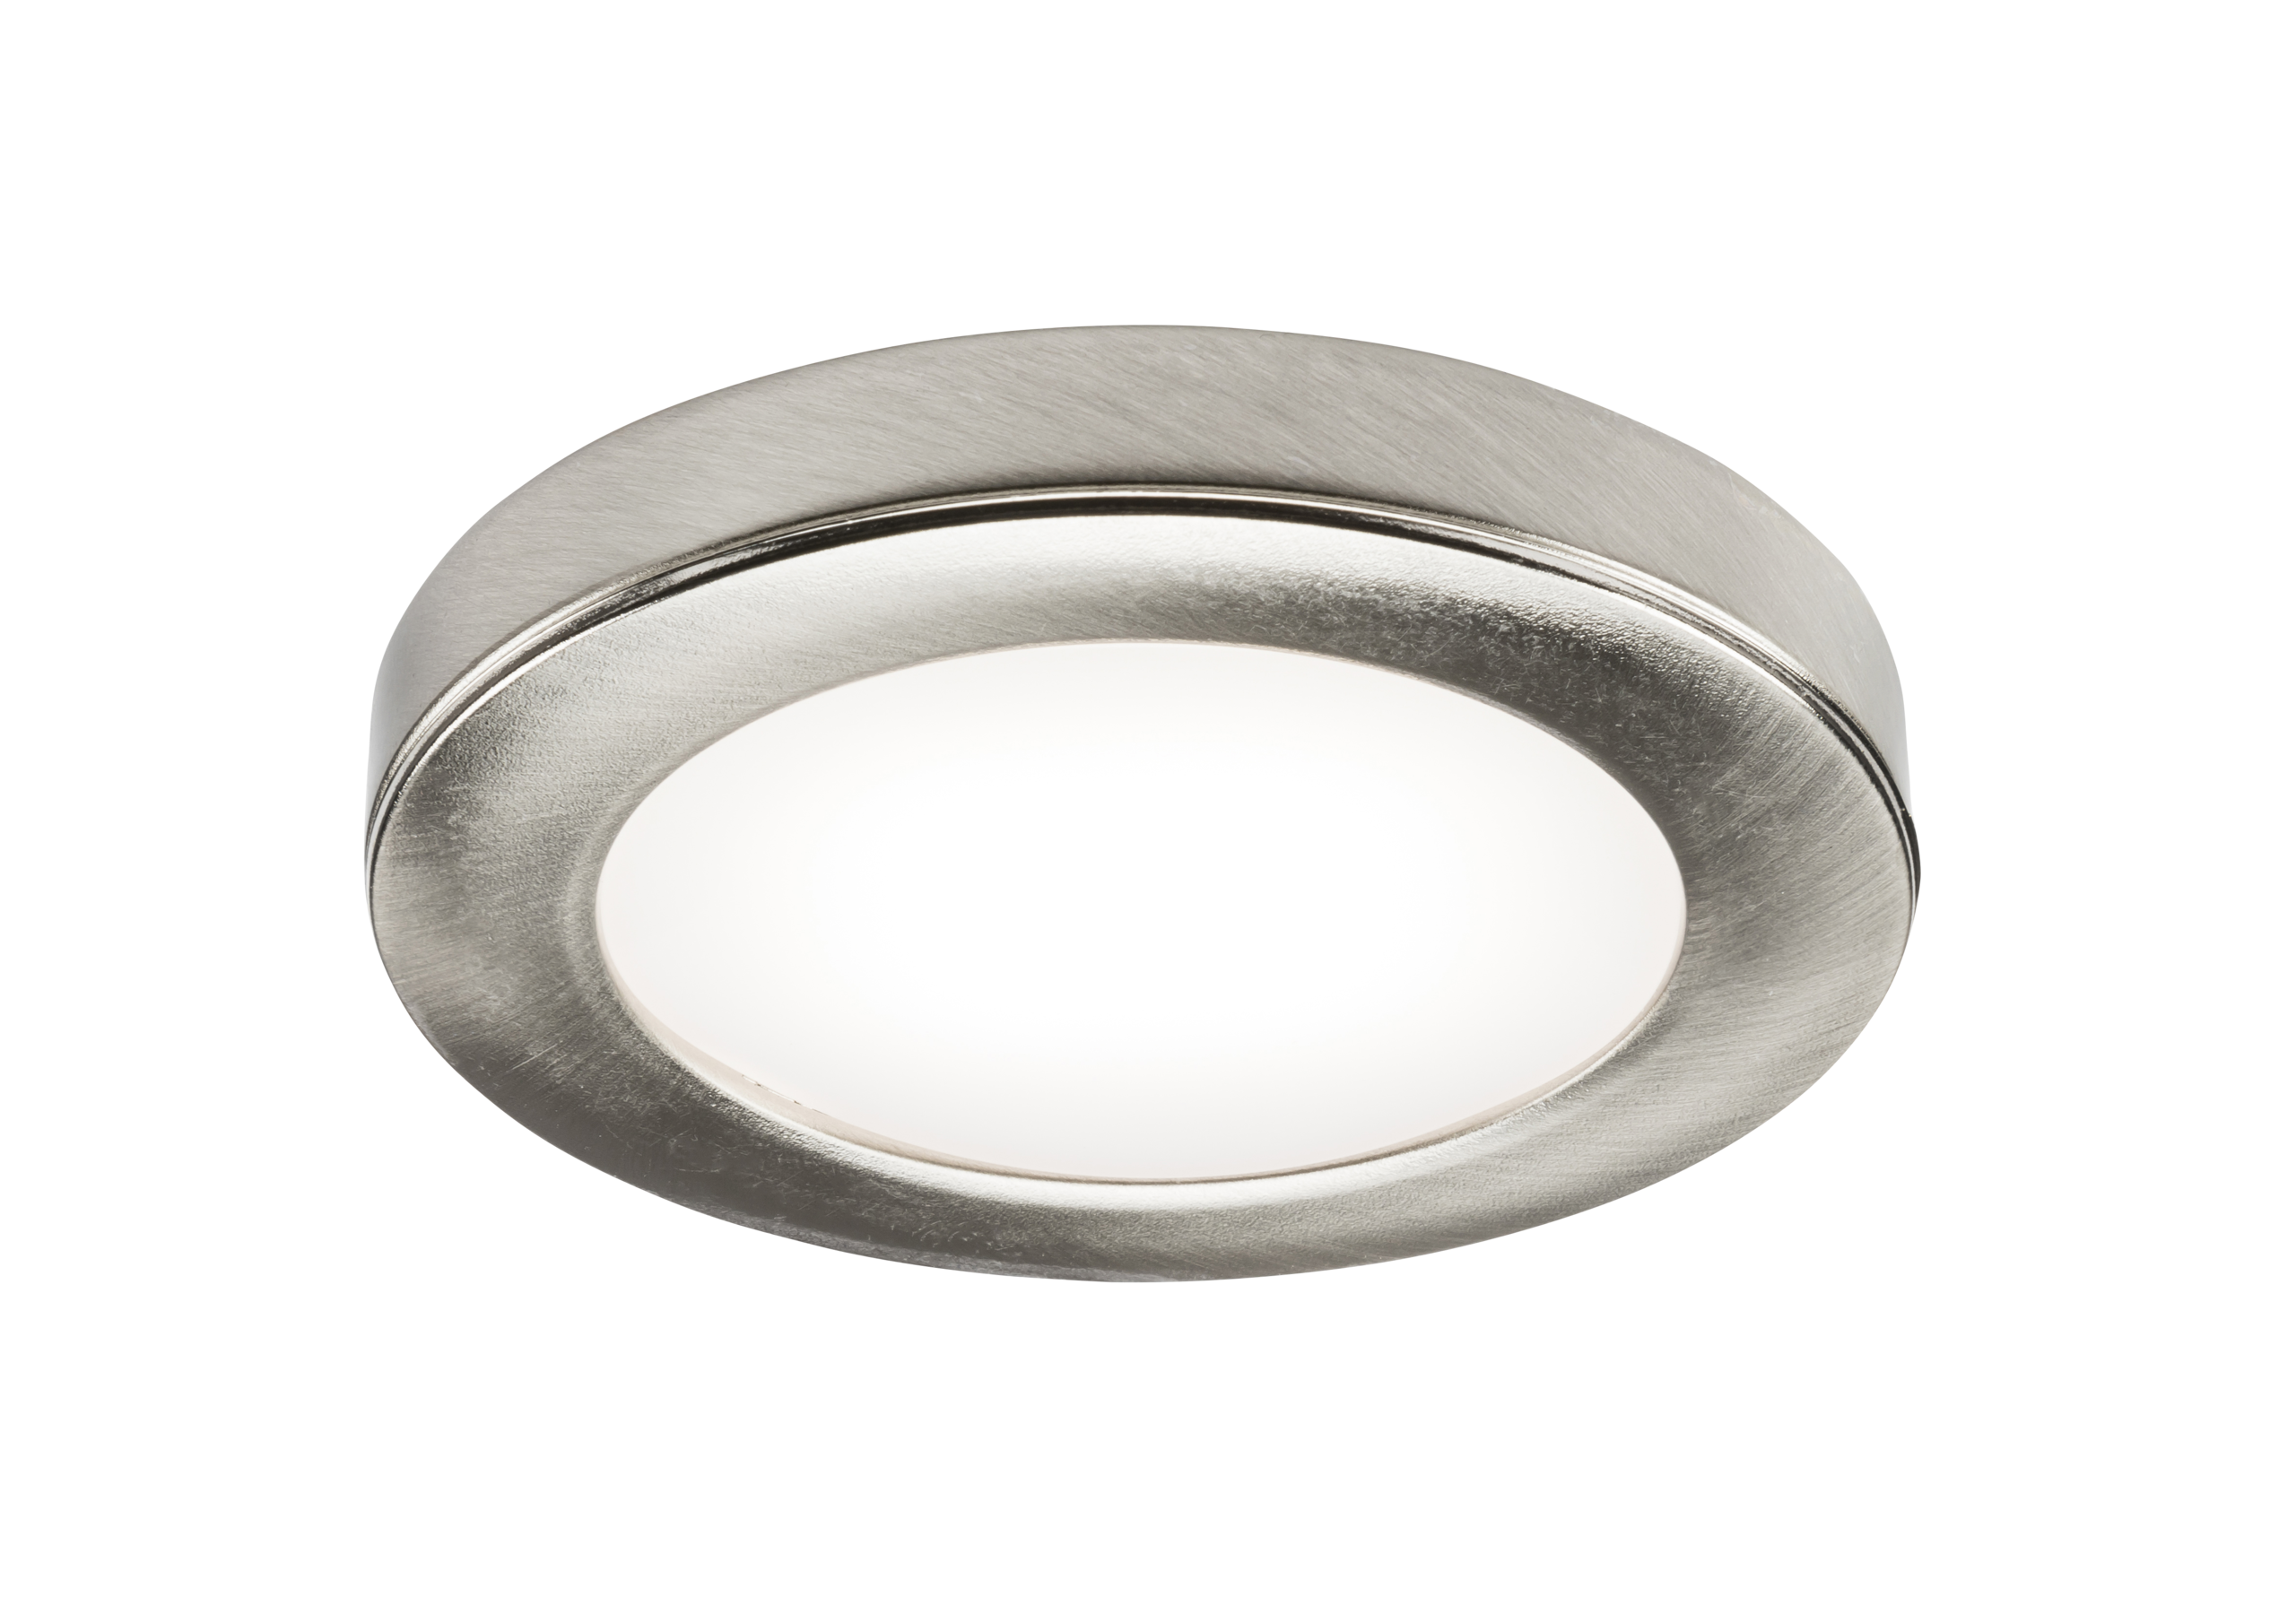 ML Accessories-UNDK3BCCW UNDKIT Single 2.5W LED Dimmable Under Cabinet Light in Brushed Chrome - 4000K